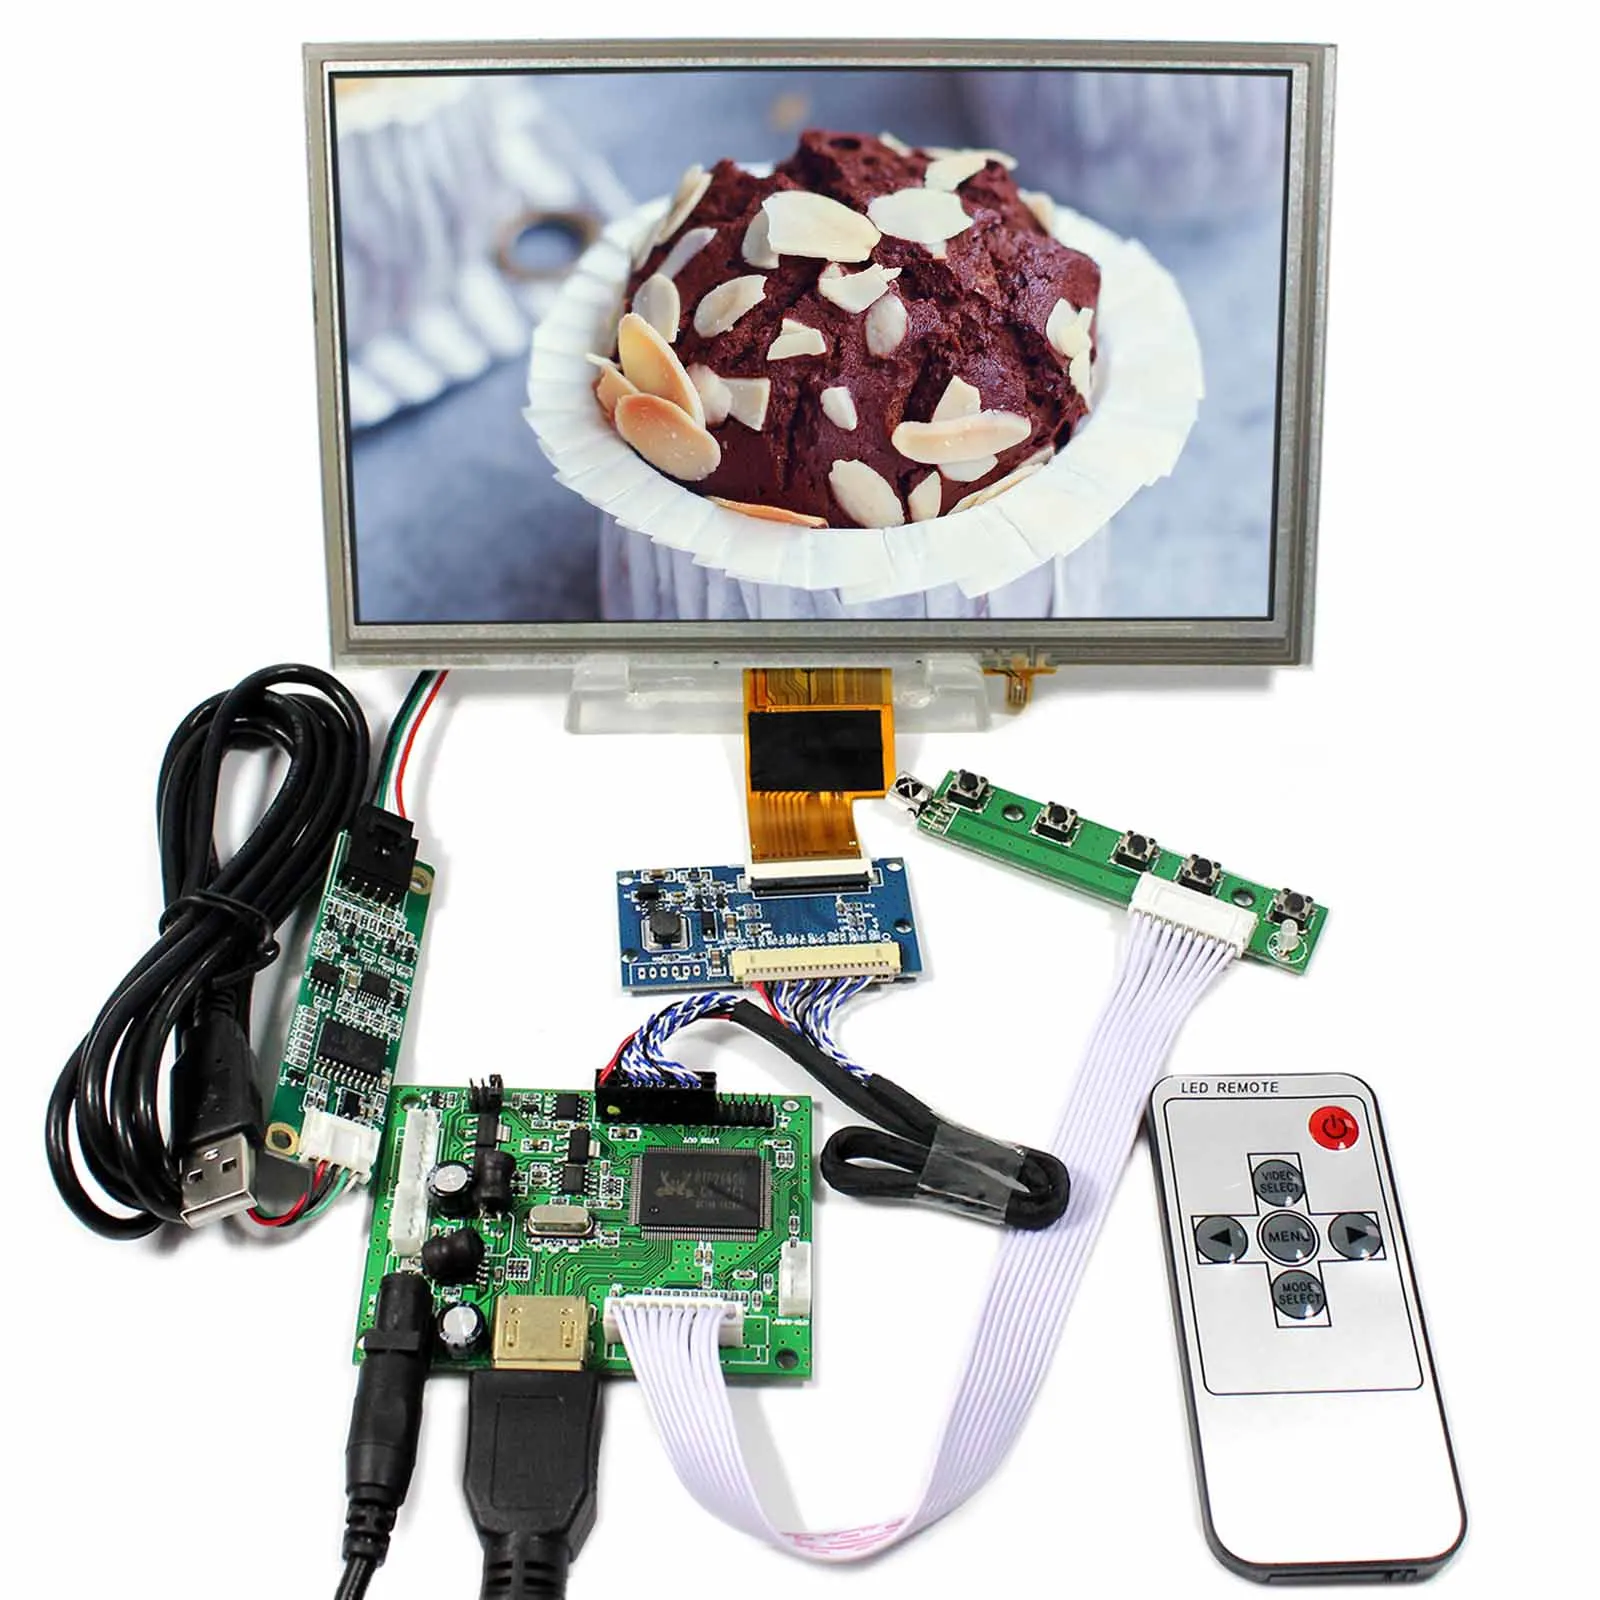 1024X600 Resolution 8 inch touch screen Backlight  WLED 8inch LCD Screen ZJ080NA-08A HD MI  LCD Controller Board VS-TY2660H-V1